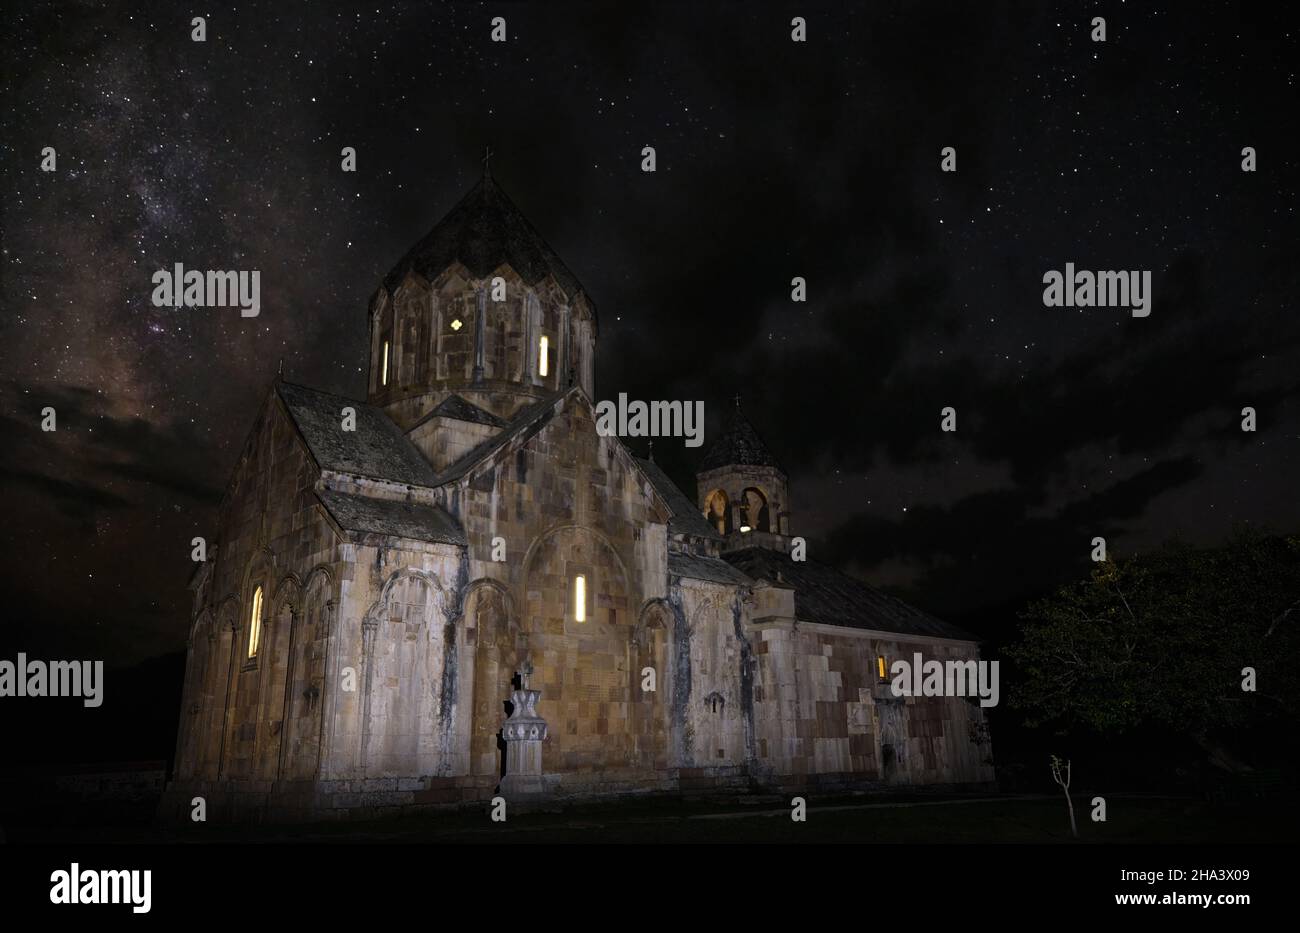 Nightscape view of a magnificent 13 c. Armenian apostolic cathedral, monastery Gandzasar, under stars with the Milky Way galaxy in the backgroun Stock Photo